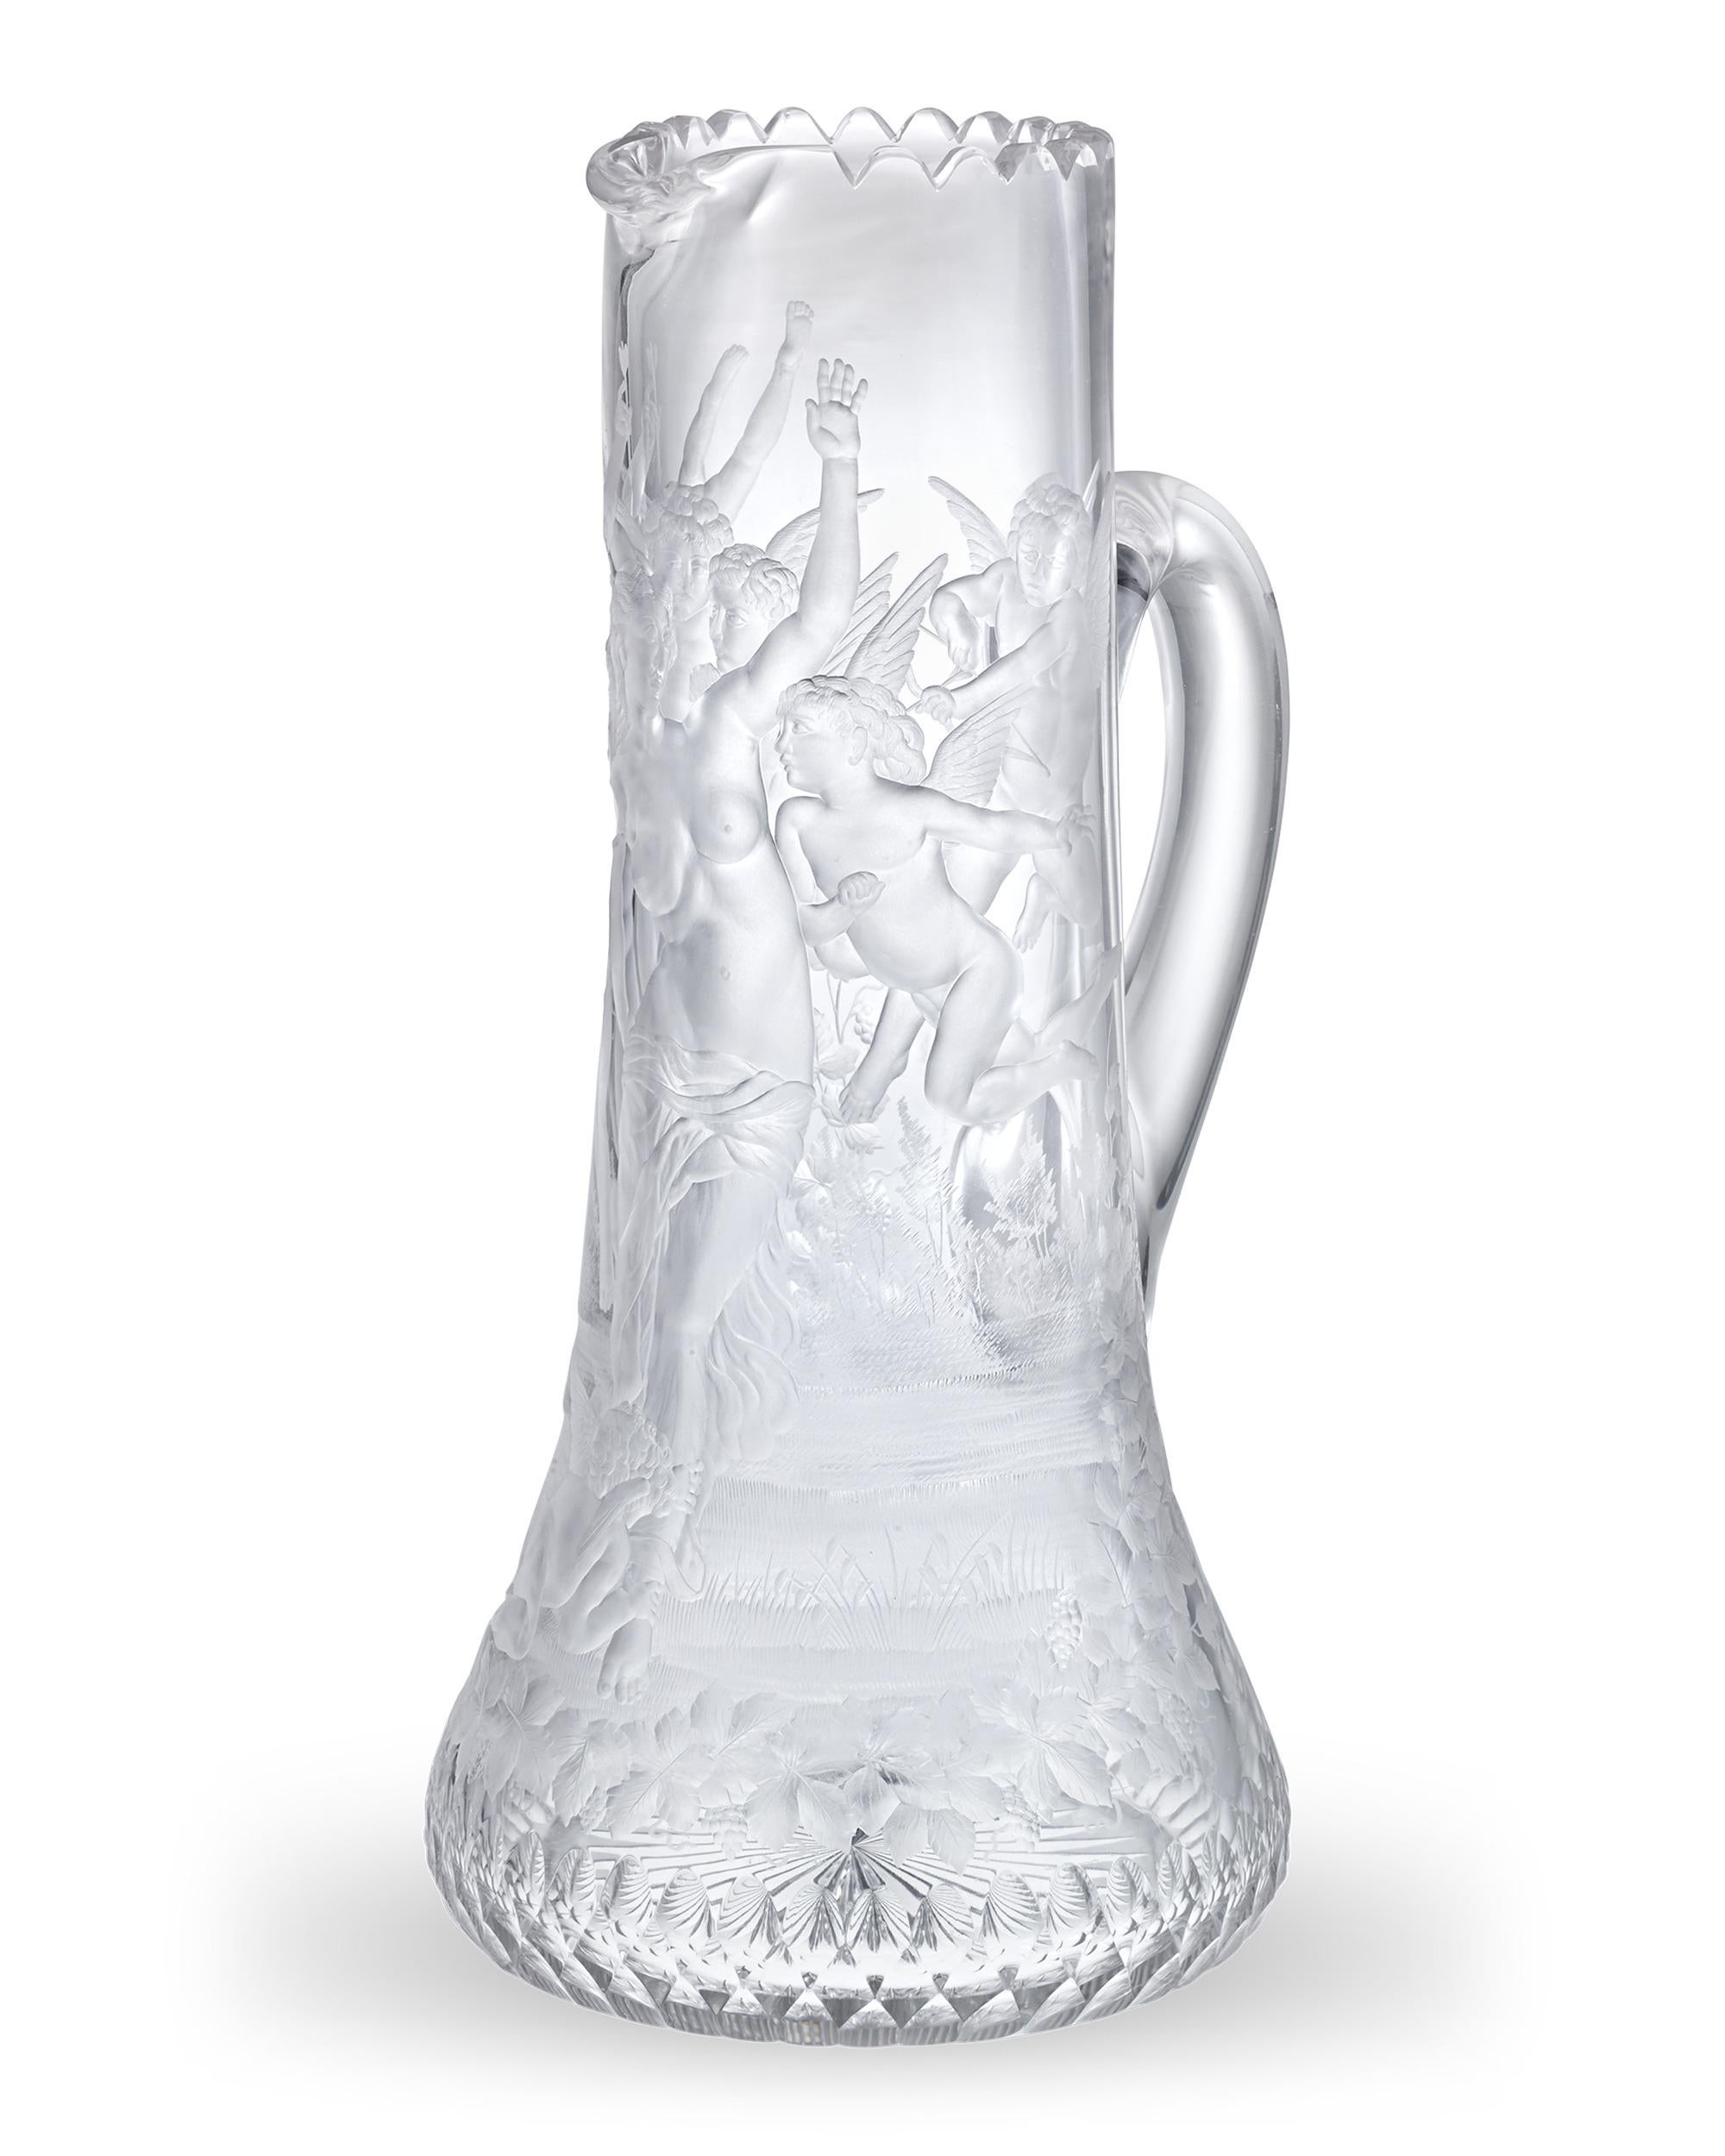 This exquisite engraved and cut glass pitcher bears frolicking figures from the oeuvre of the undisputed master of Academic art, William-Adolphe Bouguereau. The American Brilliant Period cut glass artisans pushed the boundaries of traditional